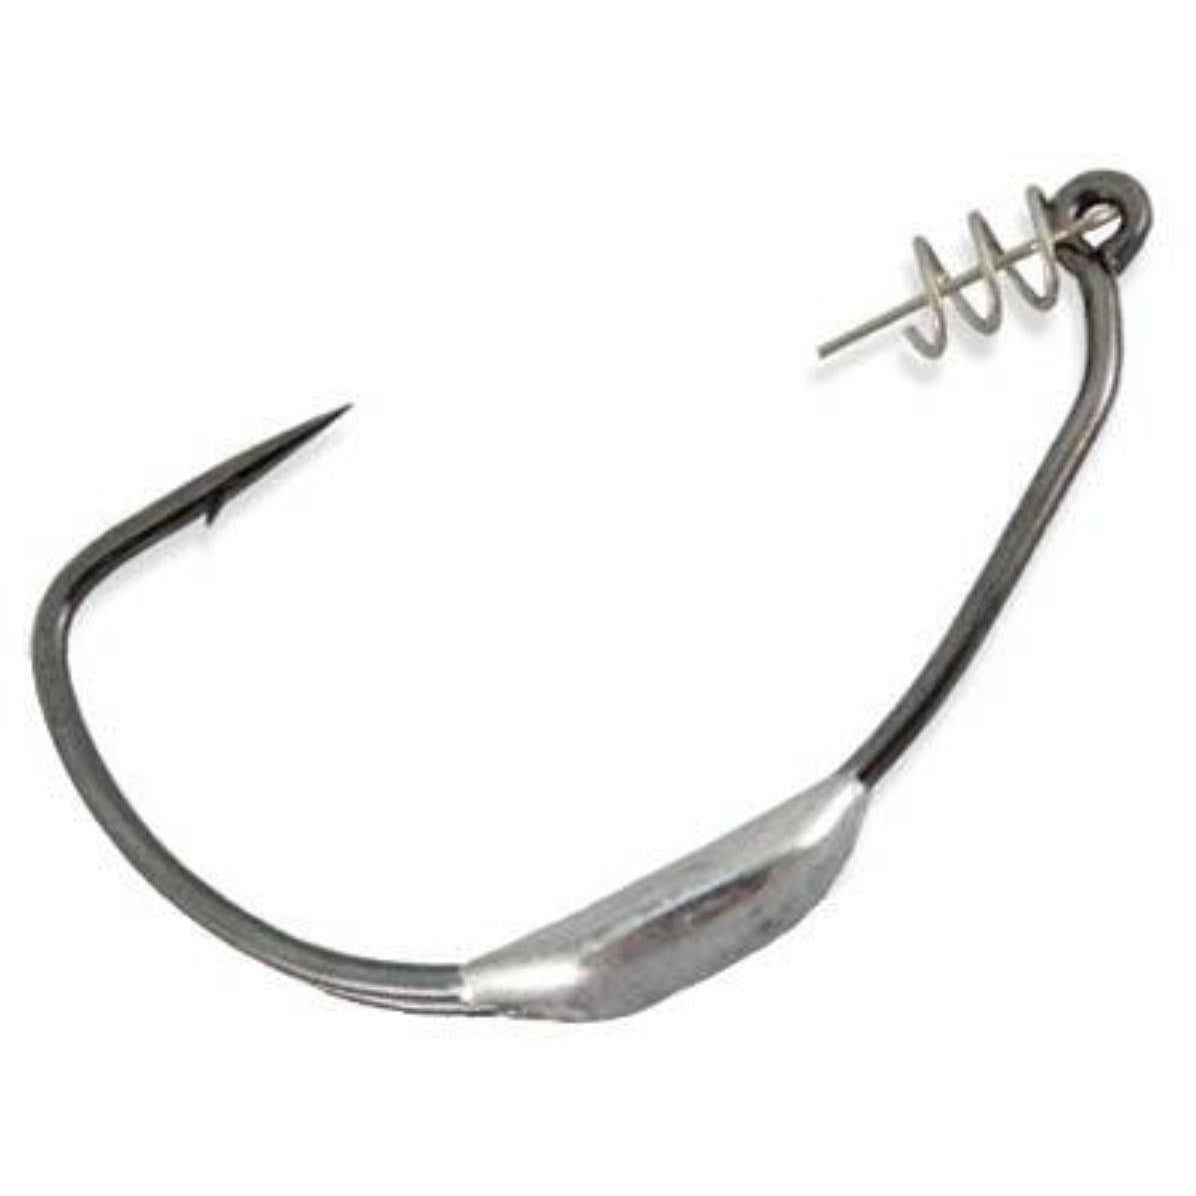 Terminal Tackle - Hooks - Page 1 - C.M. Tackle Inc. DBA TackleNow!